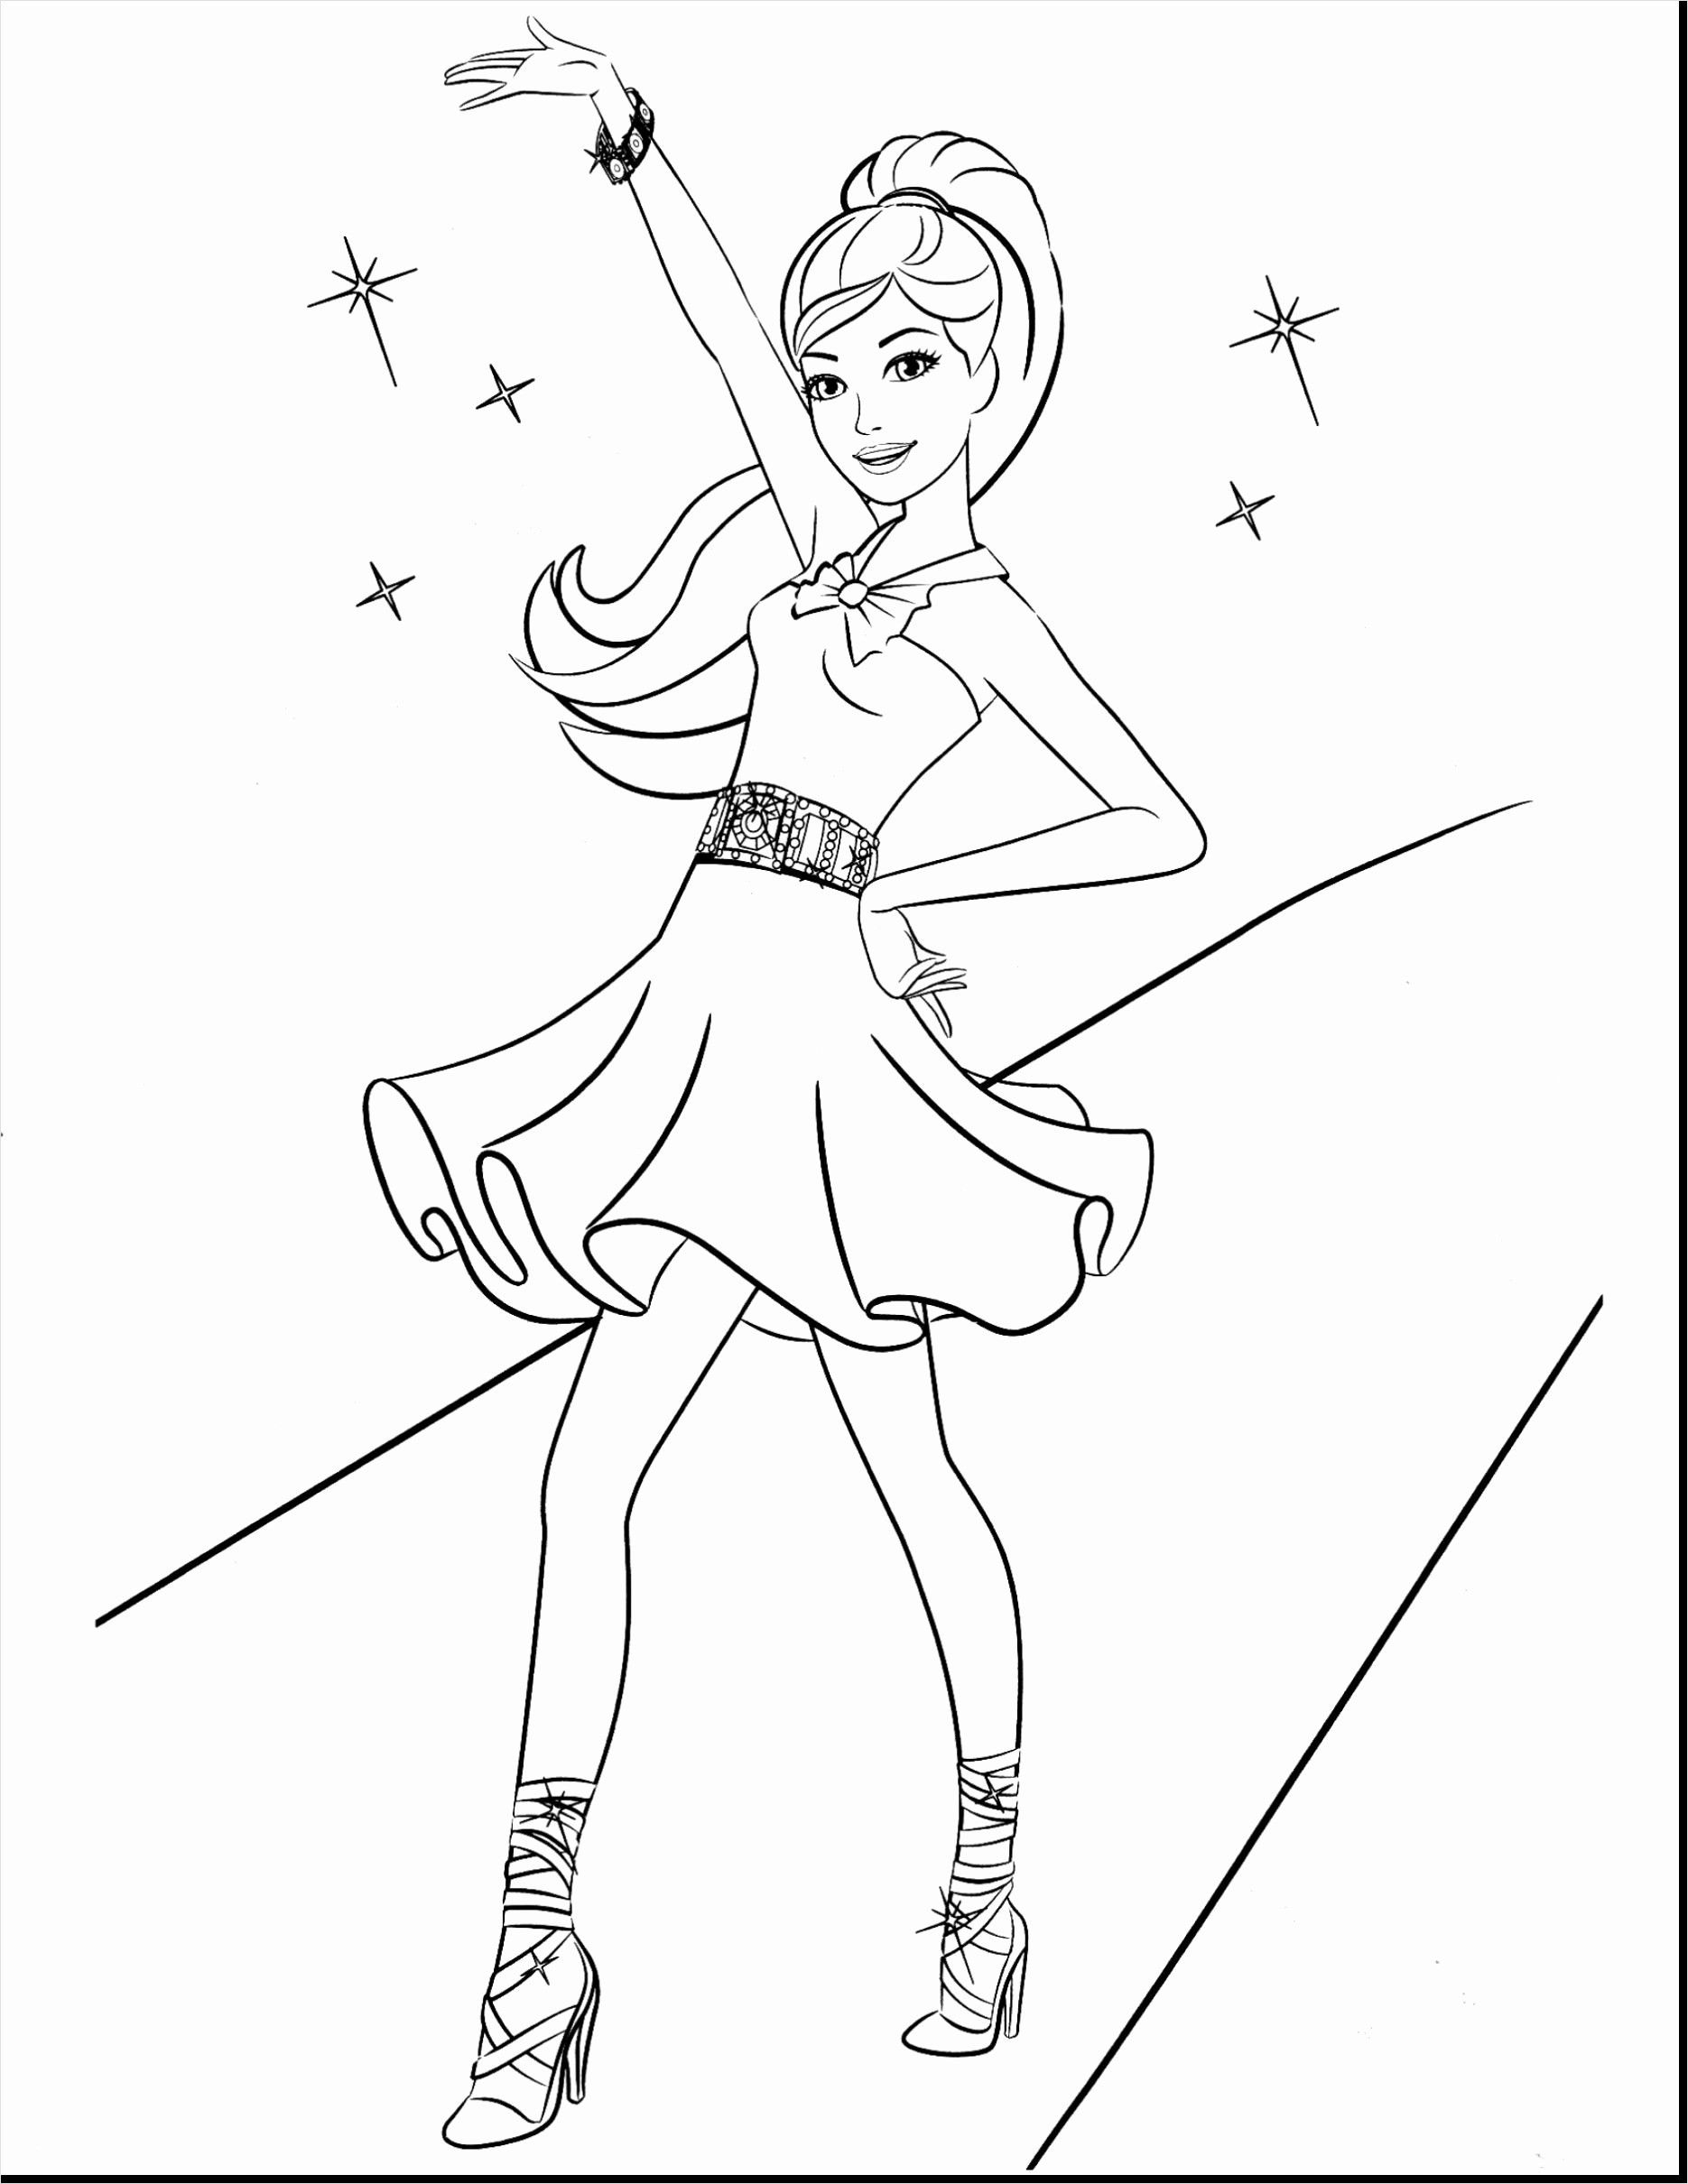 Coloring Pages Of Barbie Dolls | Barbie coloring pages, Princess ...